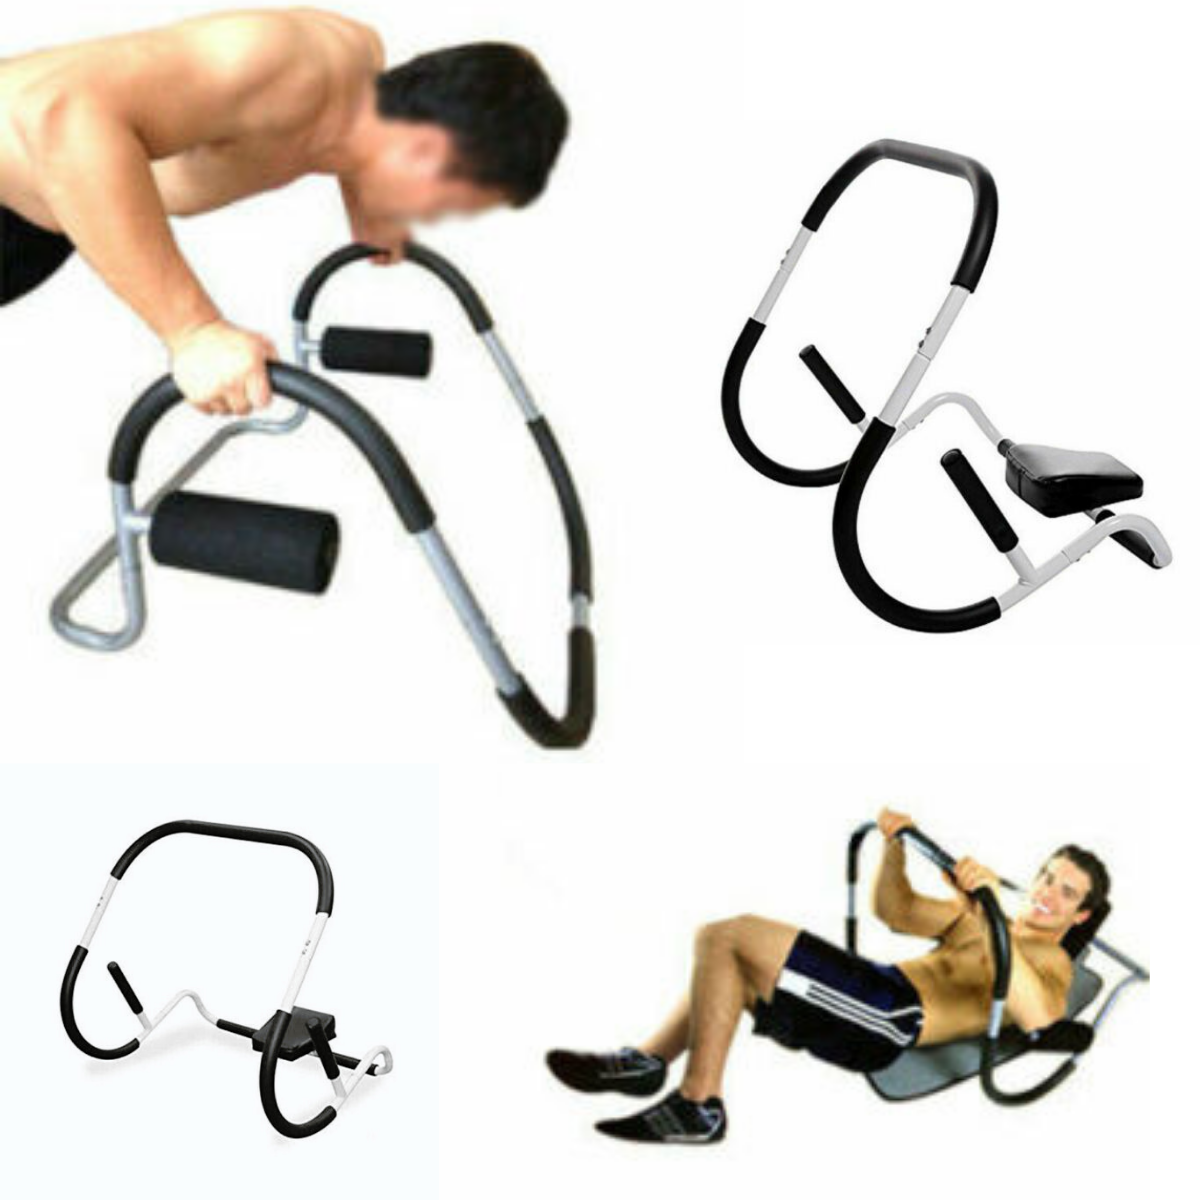 1x Home Gym Fitness AB Roller Abdominal Crunch Exercise Machine Situp Trainer